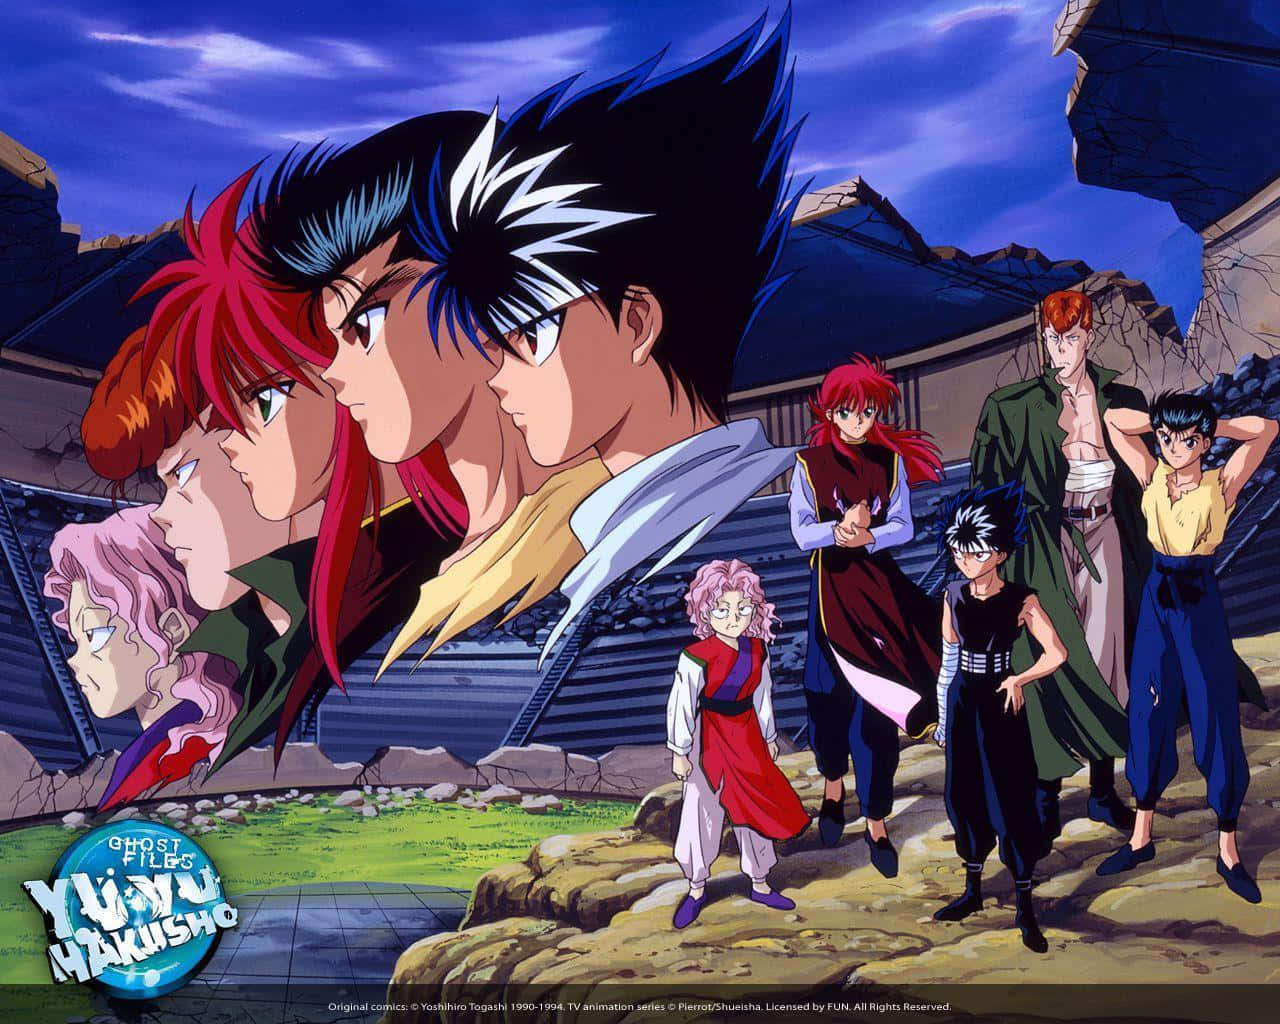 Get ready to join Yusuke Urameshi and his gang on their quest in Yu Yu Hakusho